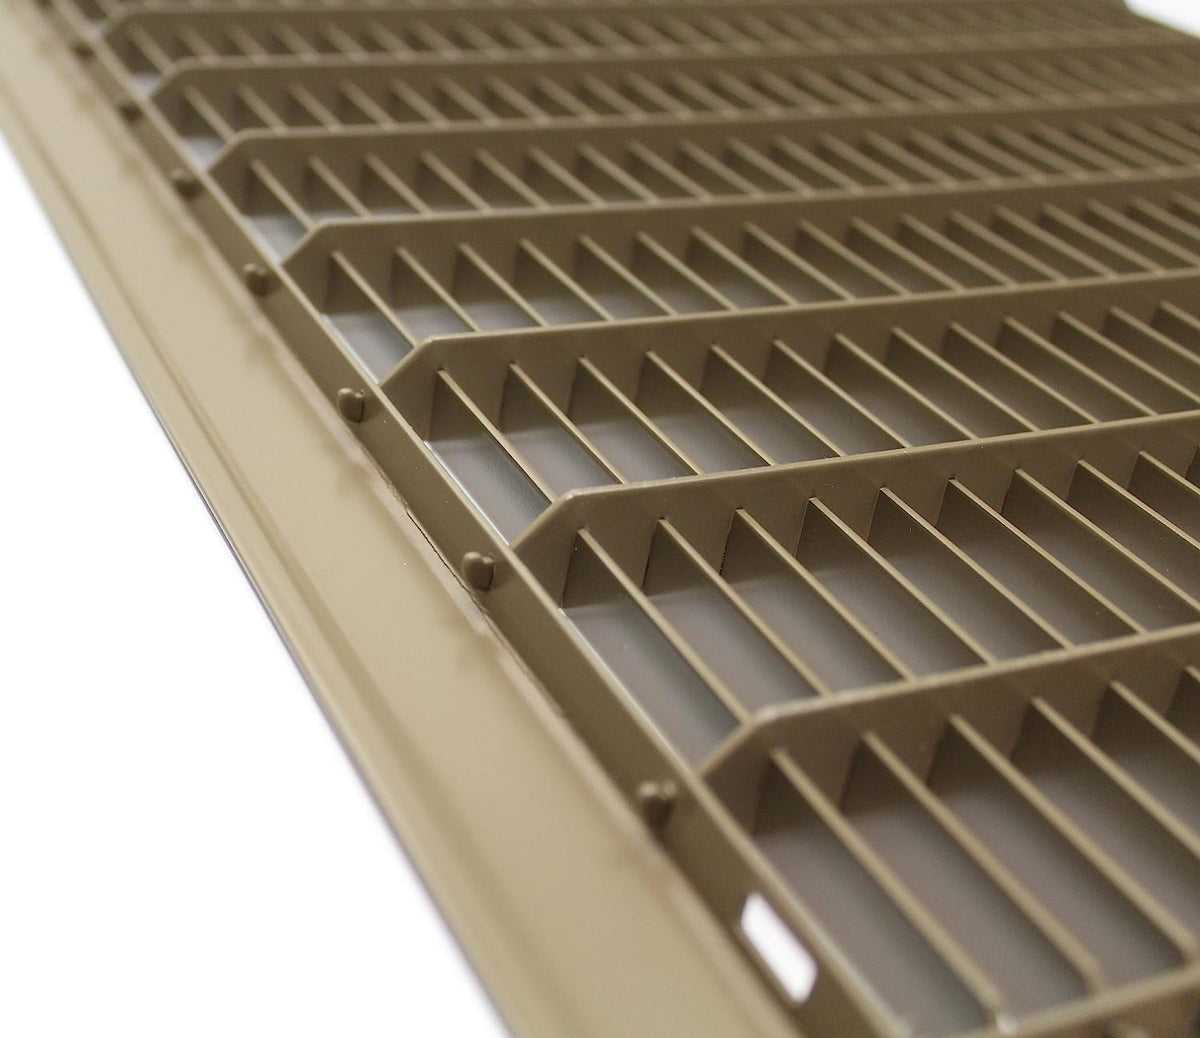 6&quot; X 18&quot; or 18&quot; x 6&quot; Heavy Duty Floor Grille - Fixed Blades Air Grille - Brown [Outer Dimensions: 7.75 X 19.75]